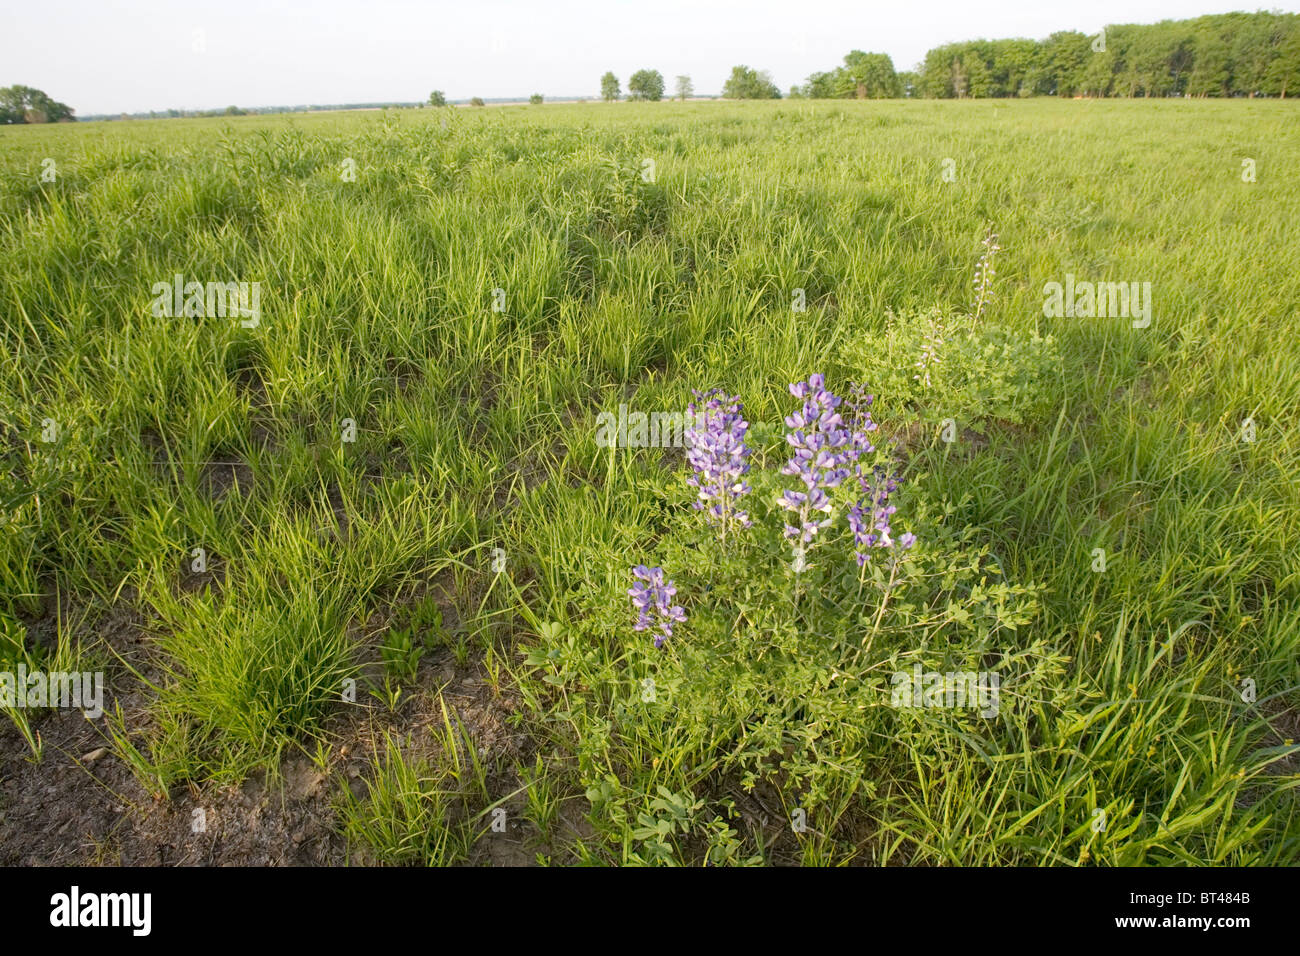 Farm field edges and roadside ditches make prefect habitat for wildflowers such as this Wild Indigo plant. Stock Photo